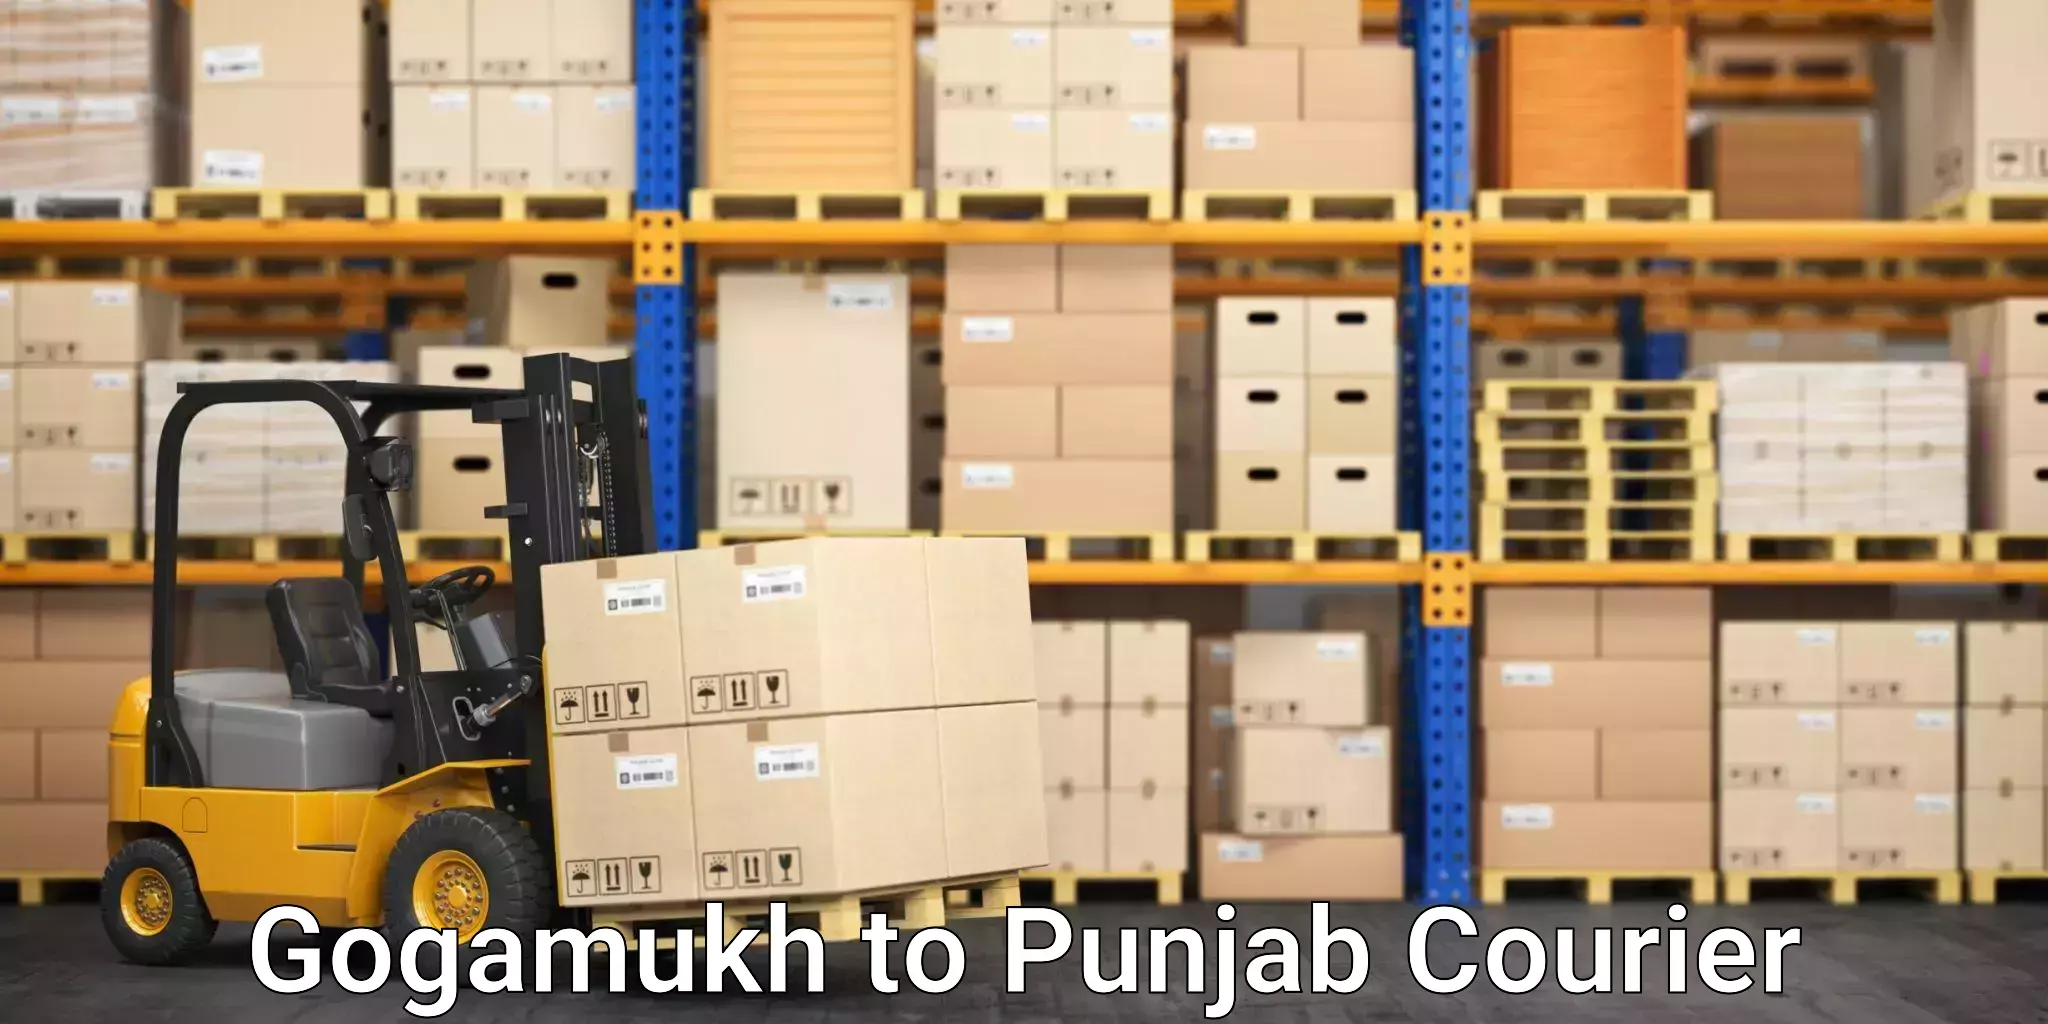 Quality courier services in Gogamukh to Mohali